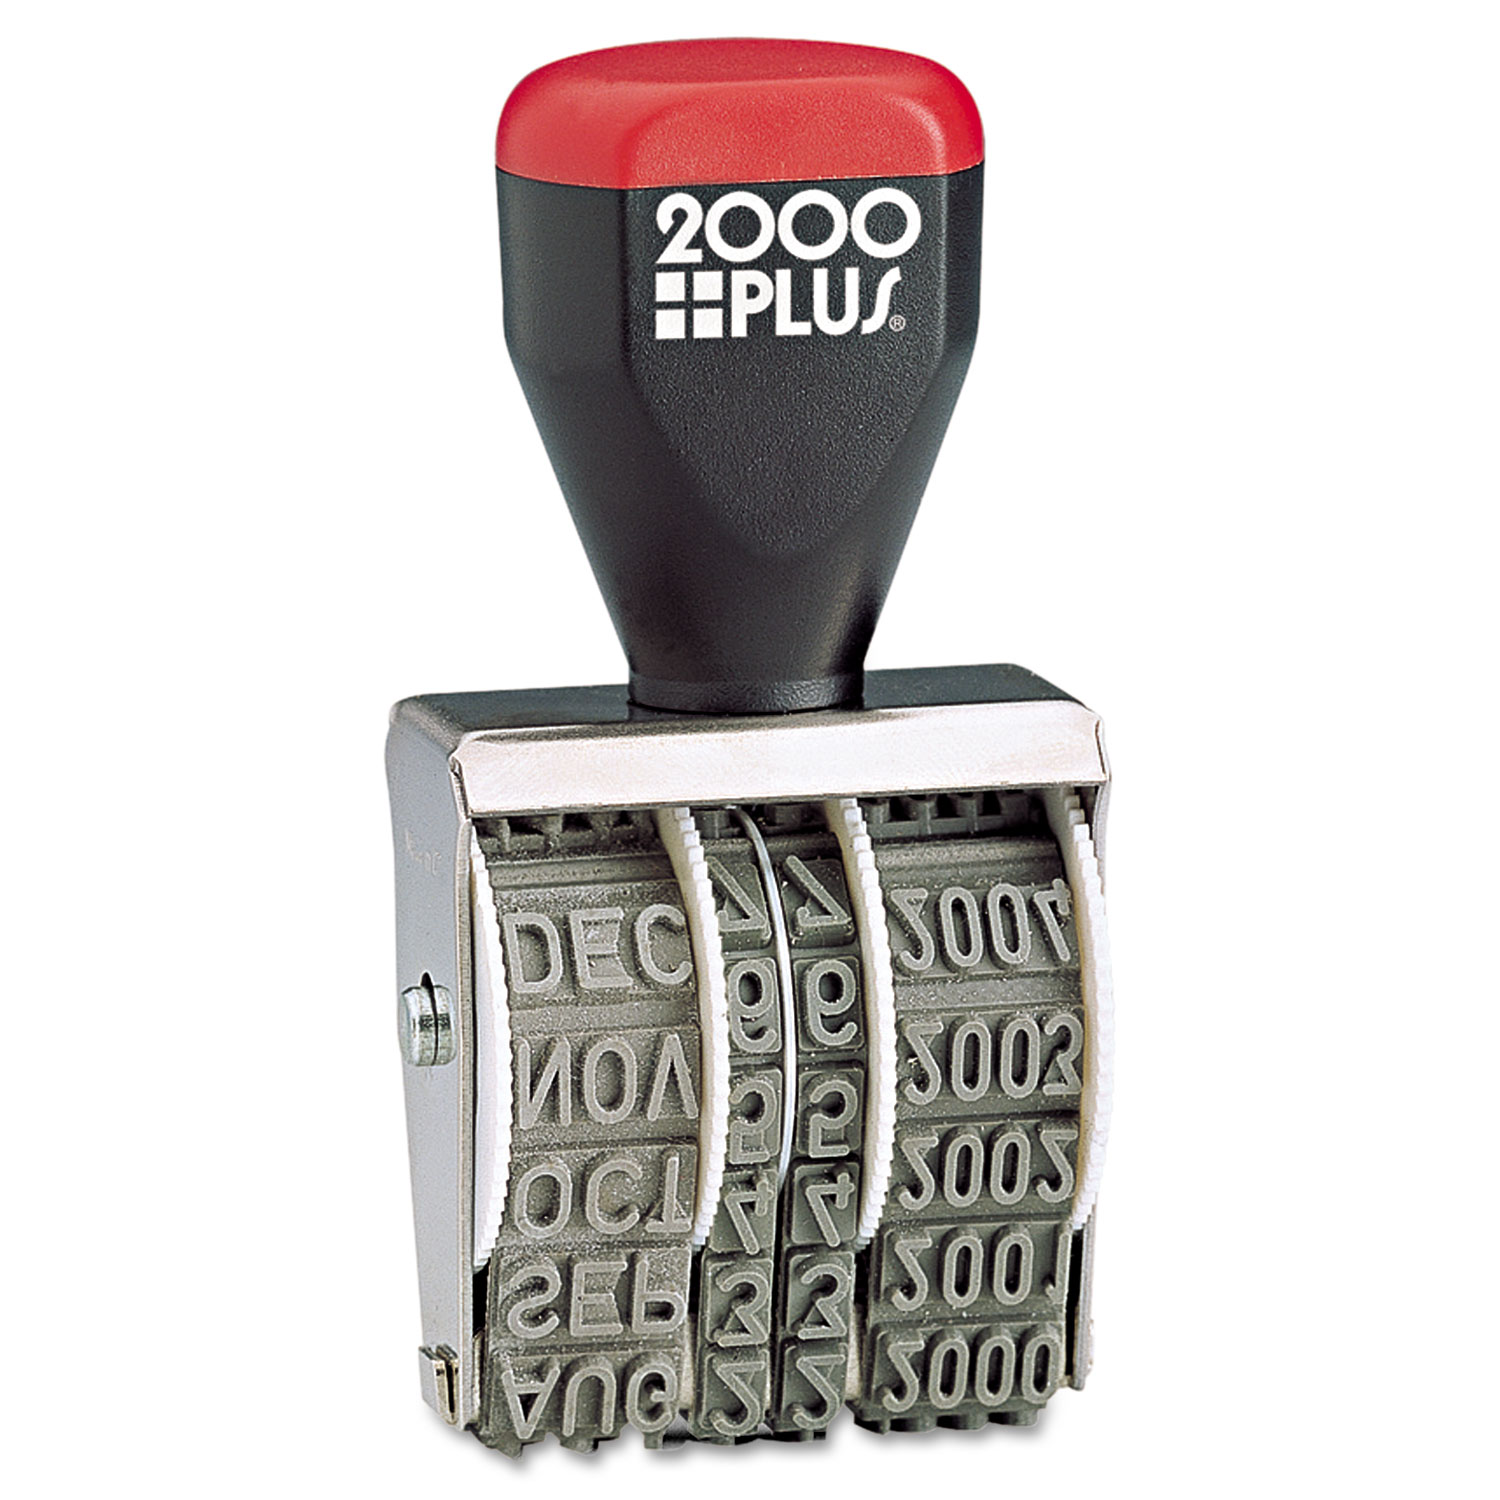  COSCO 2000PLUS 012731 Traditional Date Stamp, Six Years, 1 3/8 x 3/16 (COS012731) 